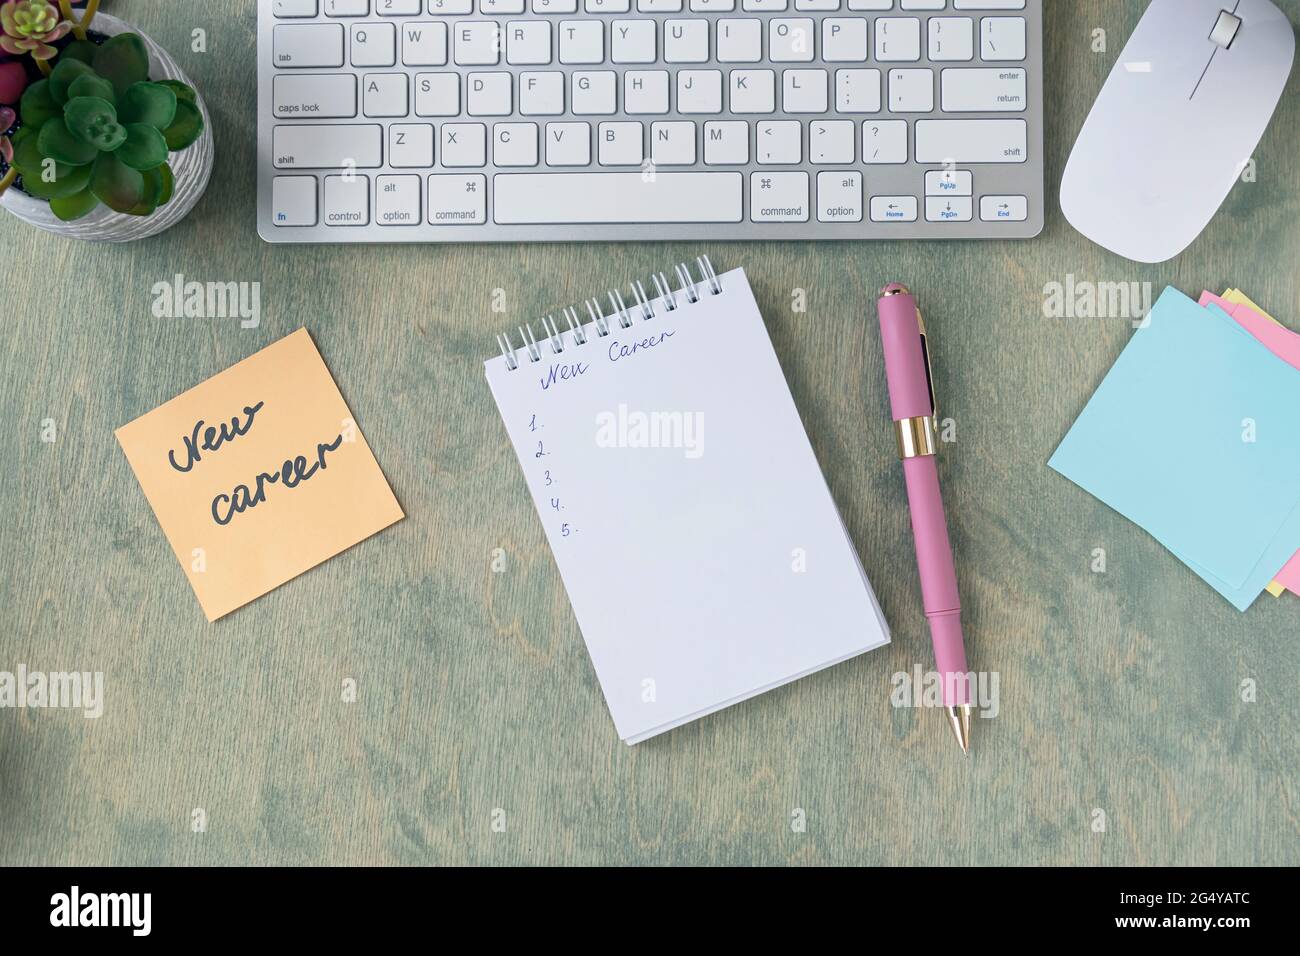 top view of the desktop with note with words NEW CAREER, empty notepad, pen, keyboard, cactus and mause on a wooden table. Business and finance concept. Flat lay Stock Photo